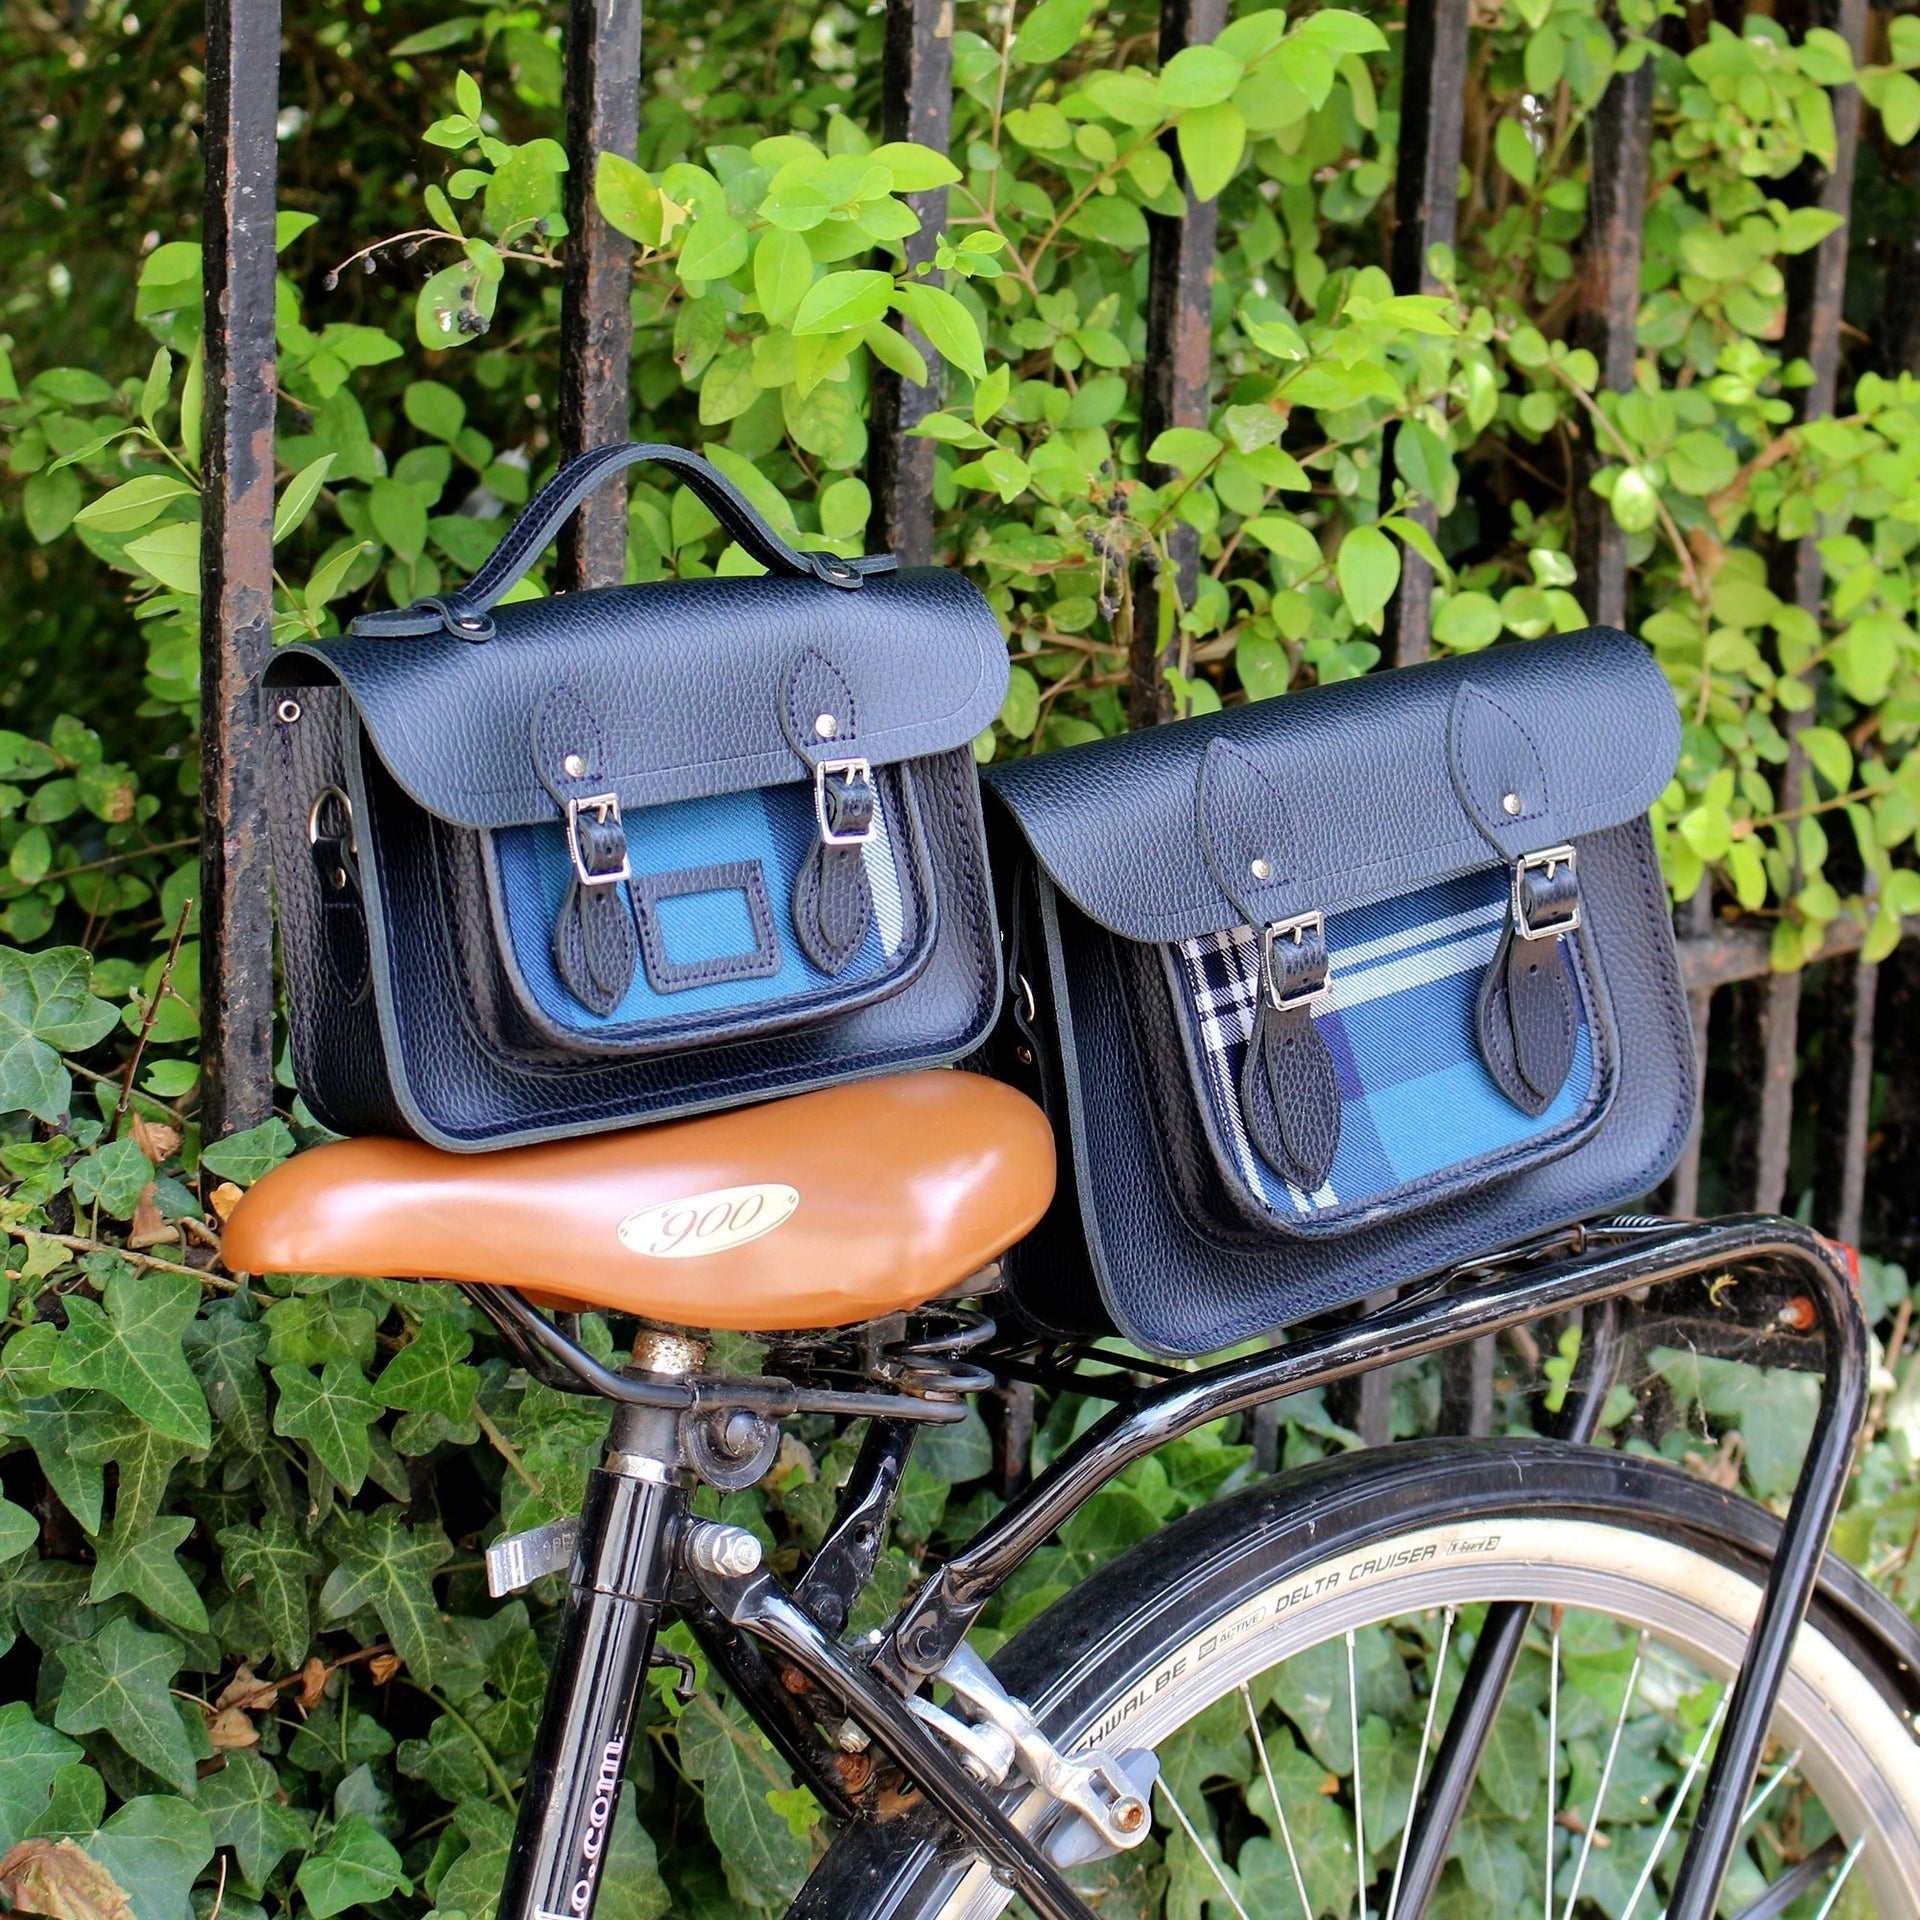 Introducing this year’s Tartans - The Cambridge Satchel Company EU Store